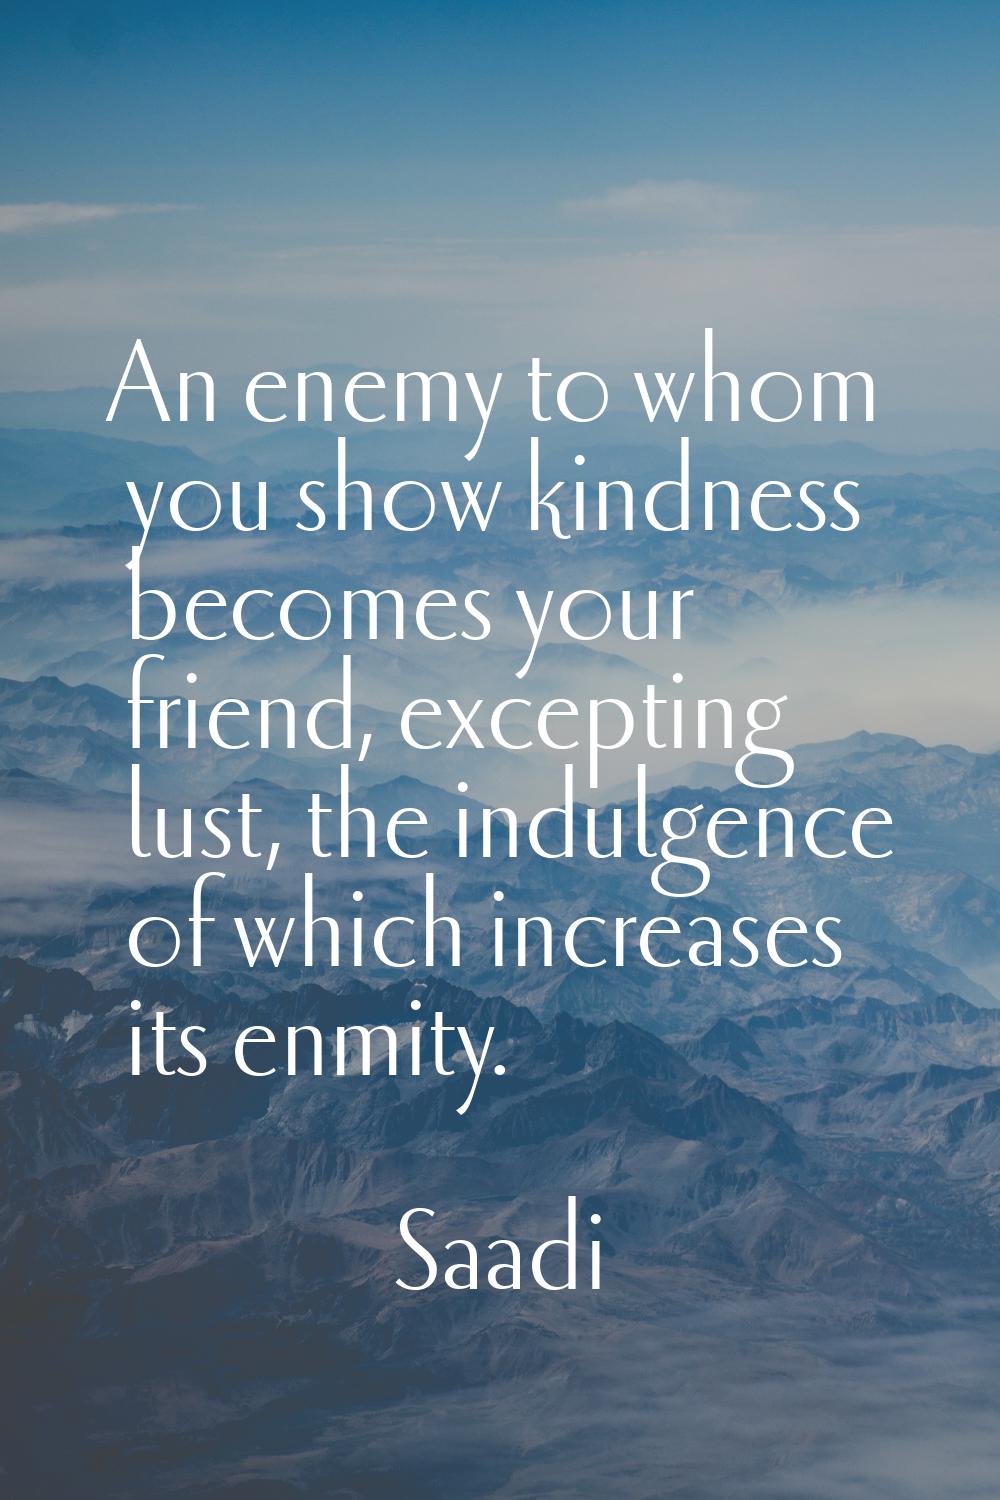 An enemy to whom you show kindness becomes your friend, excepting lust, the indulgence of which inc